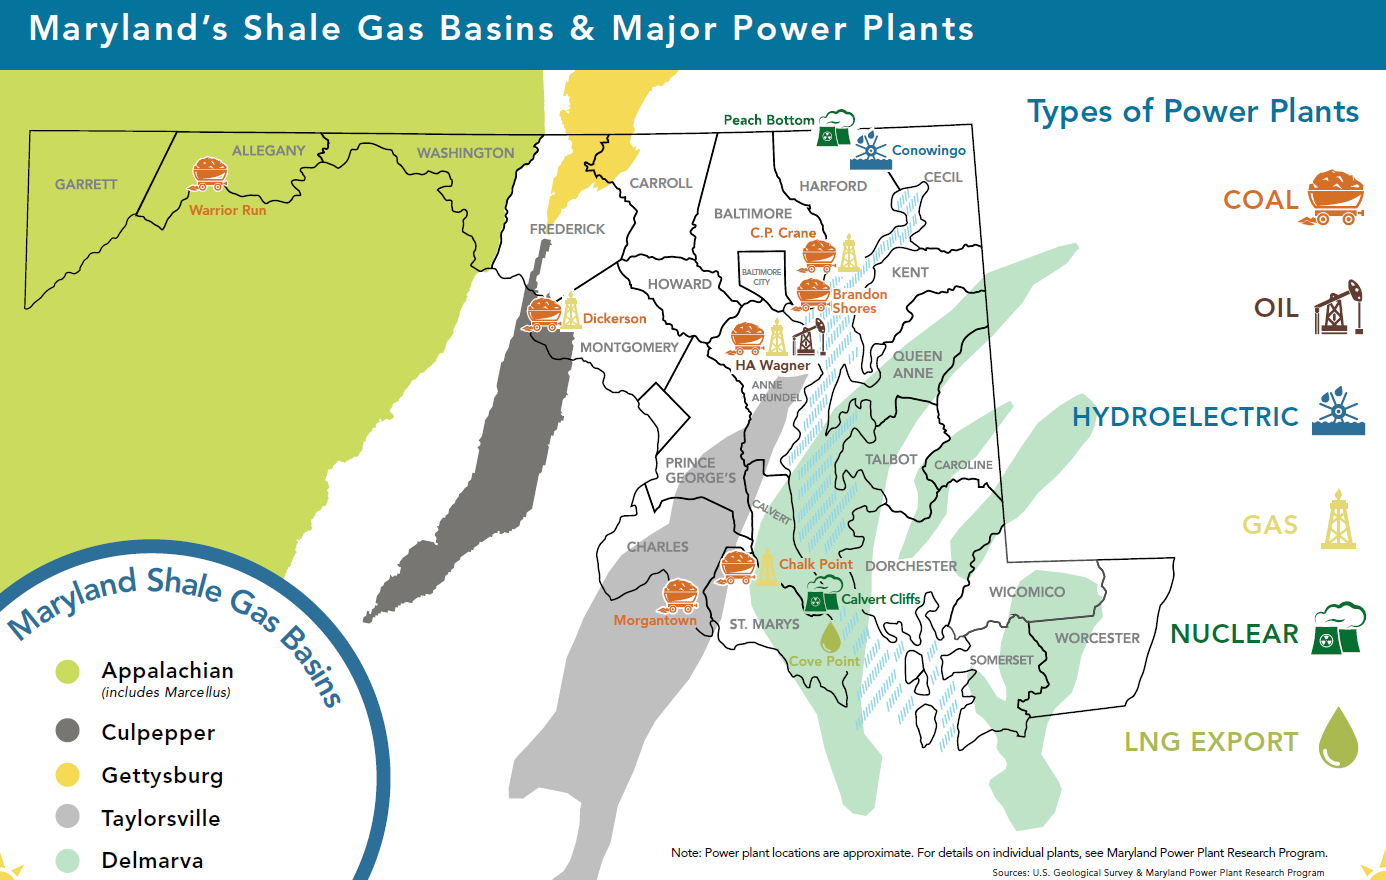 Map of MD's Shale Gas Basins and Power Plants